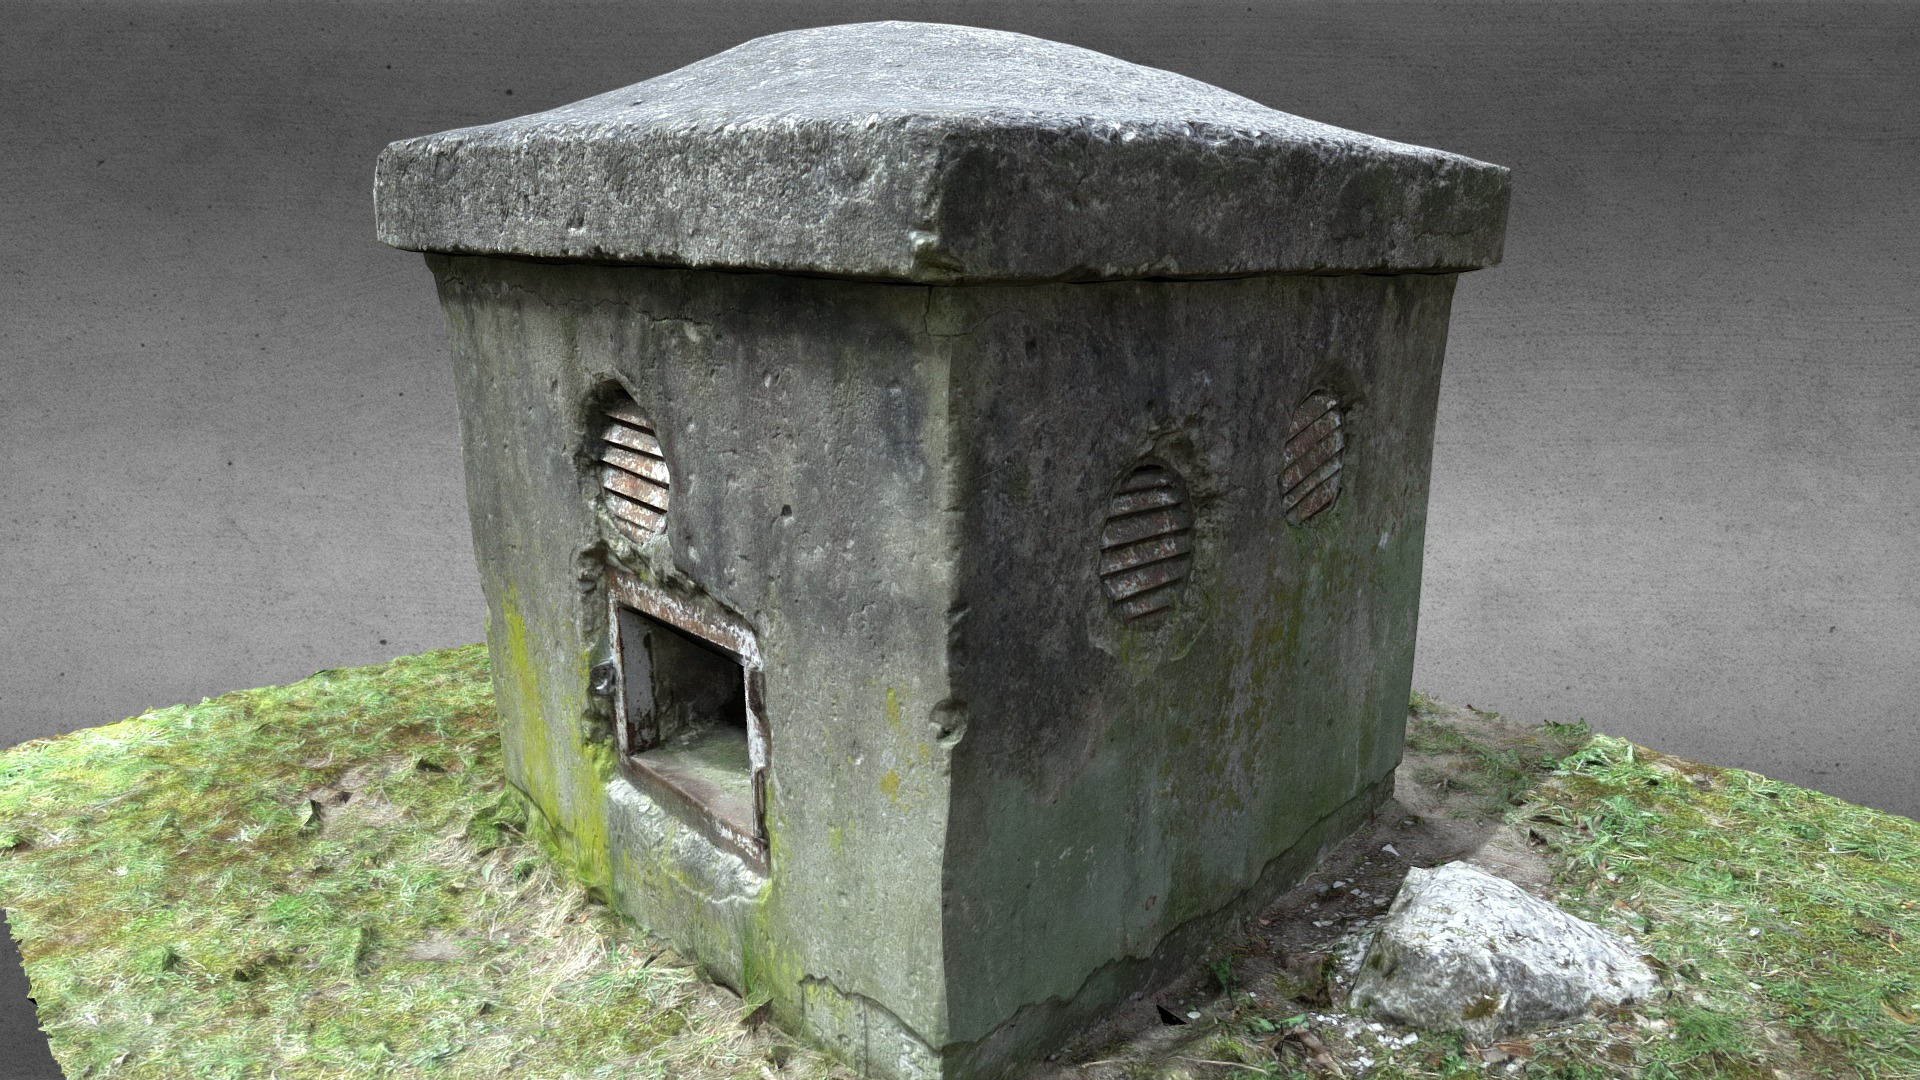 3D model Soviet Bunker Basement Ventilation ‘chimney’ - This is a 3D model of the Soviet Bunker Basement Ventilation 'chimney'. The 3D model is about a concrete structure with a hole in it.